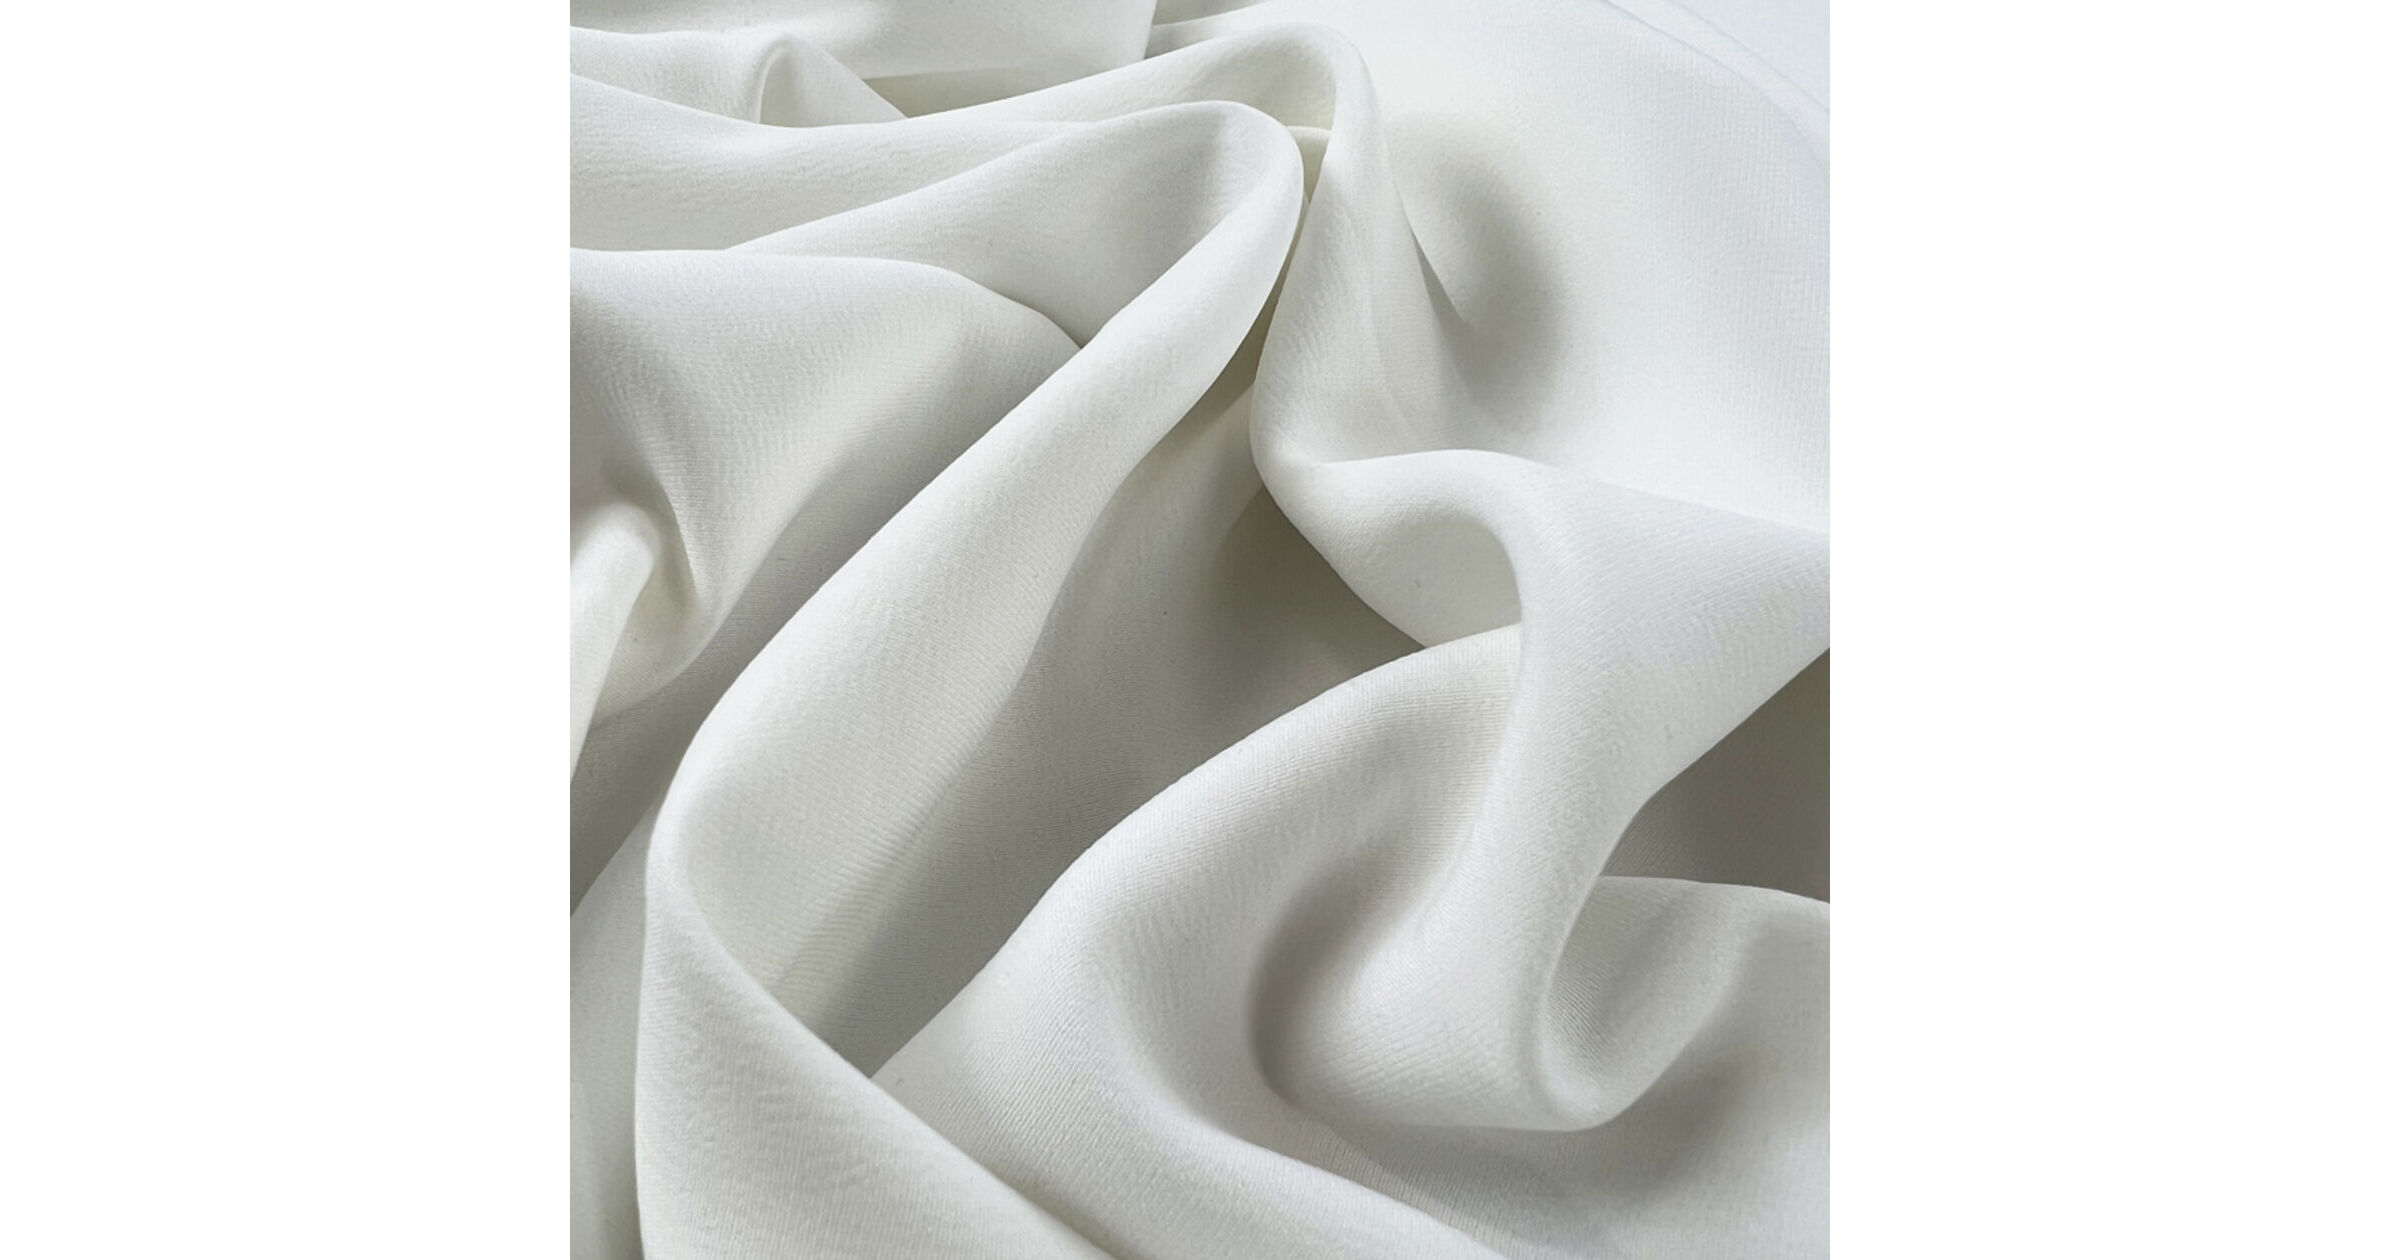 Recycled Polyester Spandex Crepe Dress Fabric - Ivory Sands